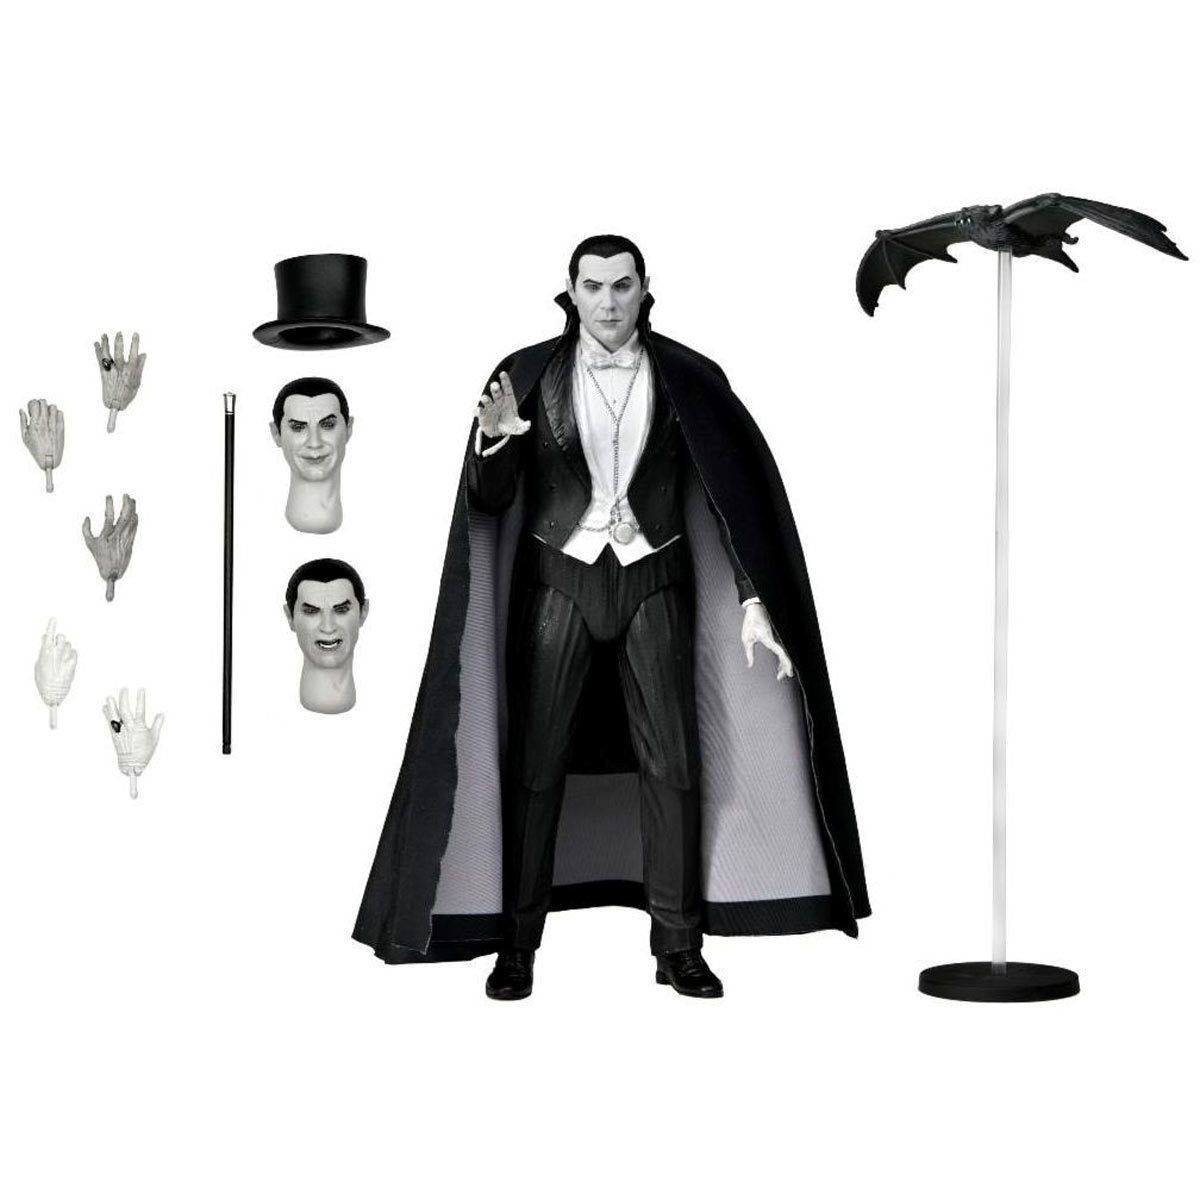 NECA Actionfigur NECA Universal Monsters Ultimate Dracula Carfax Abbey Actionfigur B&W